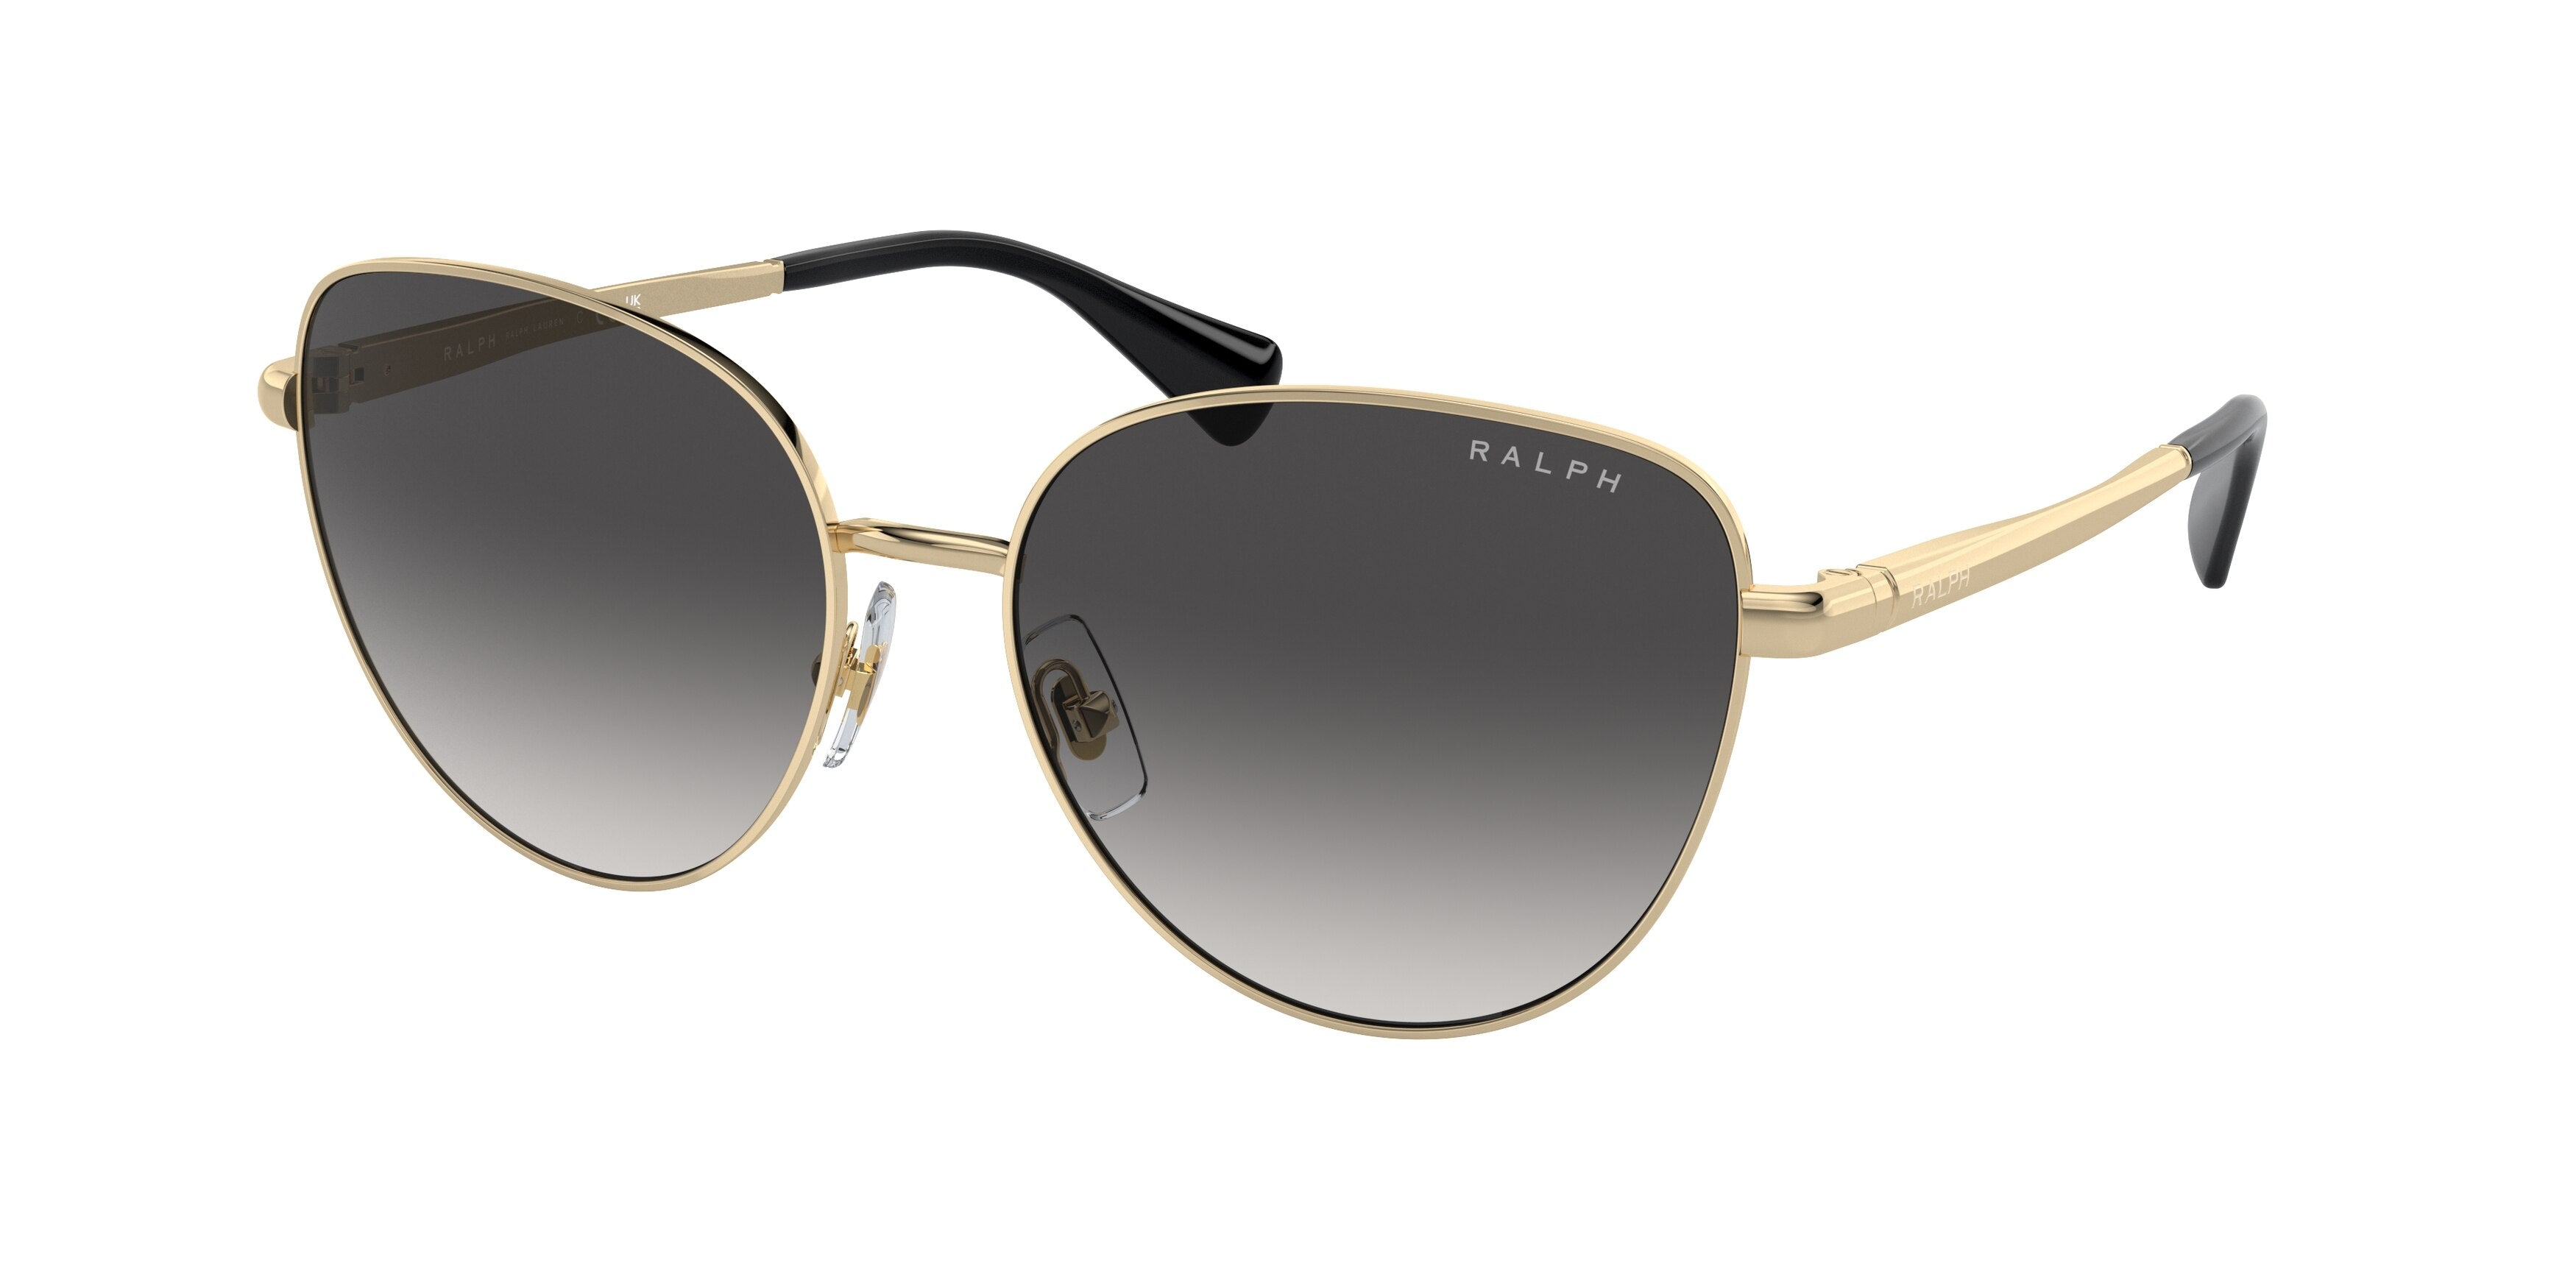 Ralph RA4144 Butterfly Sunglasses  91168G-Shiny Pale Gold 58-145-16 - Color Map Gold